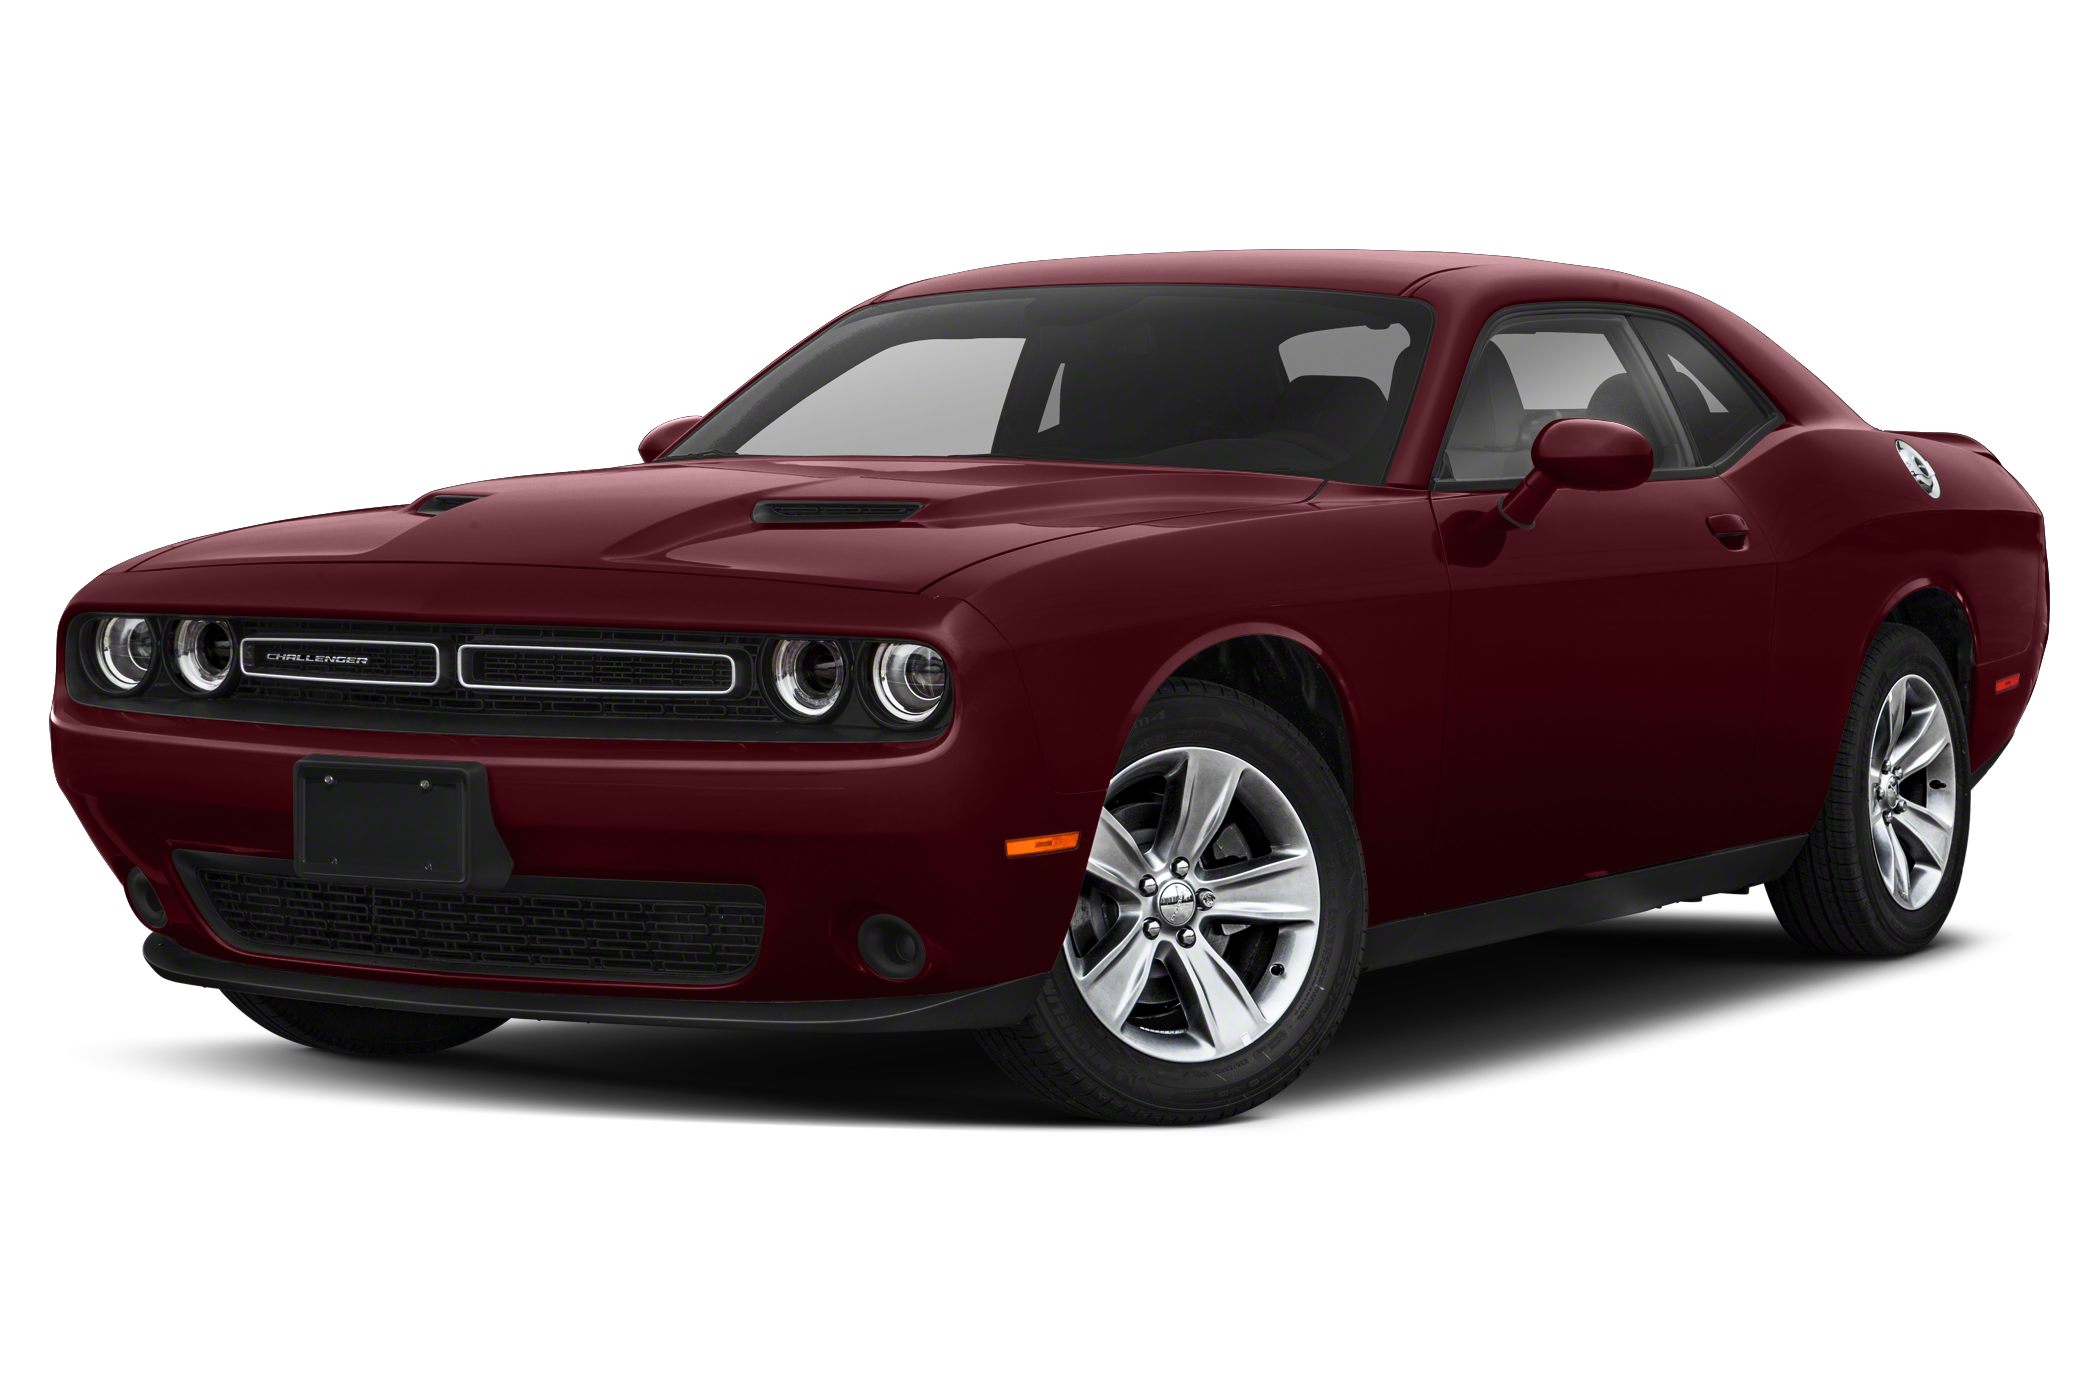 2021-dodge-challenger-will-be-available-in-gold-rush-paint-autoblog